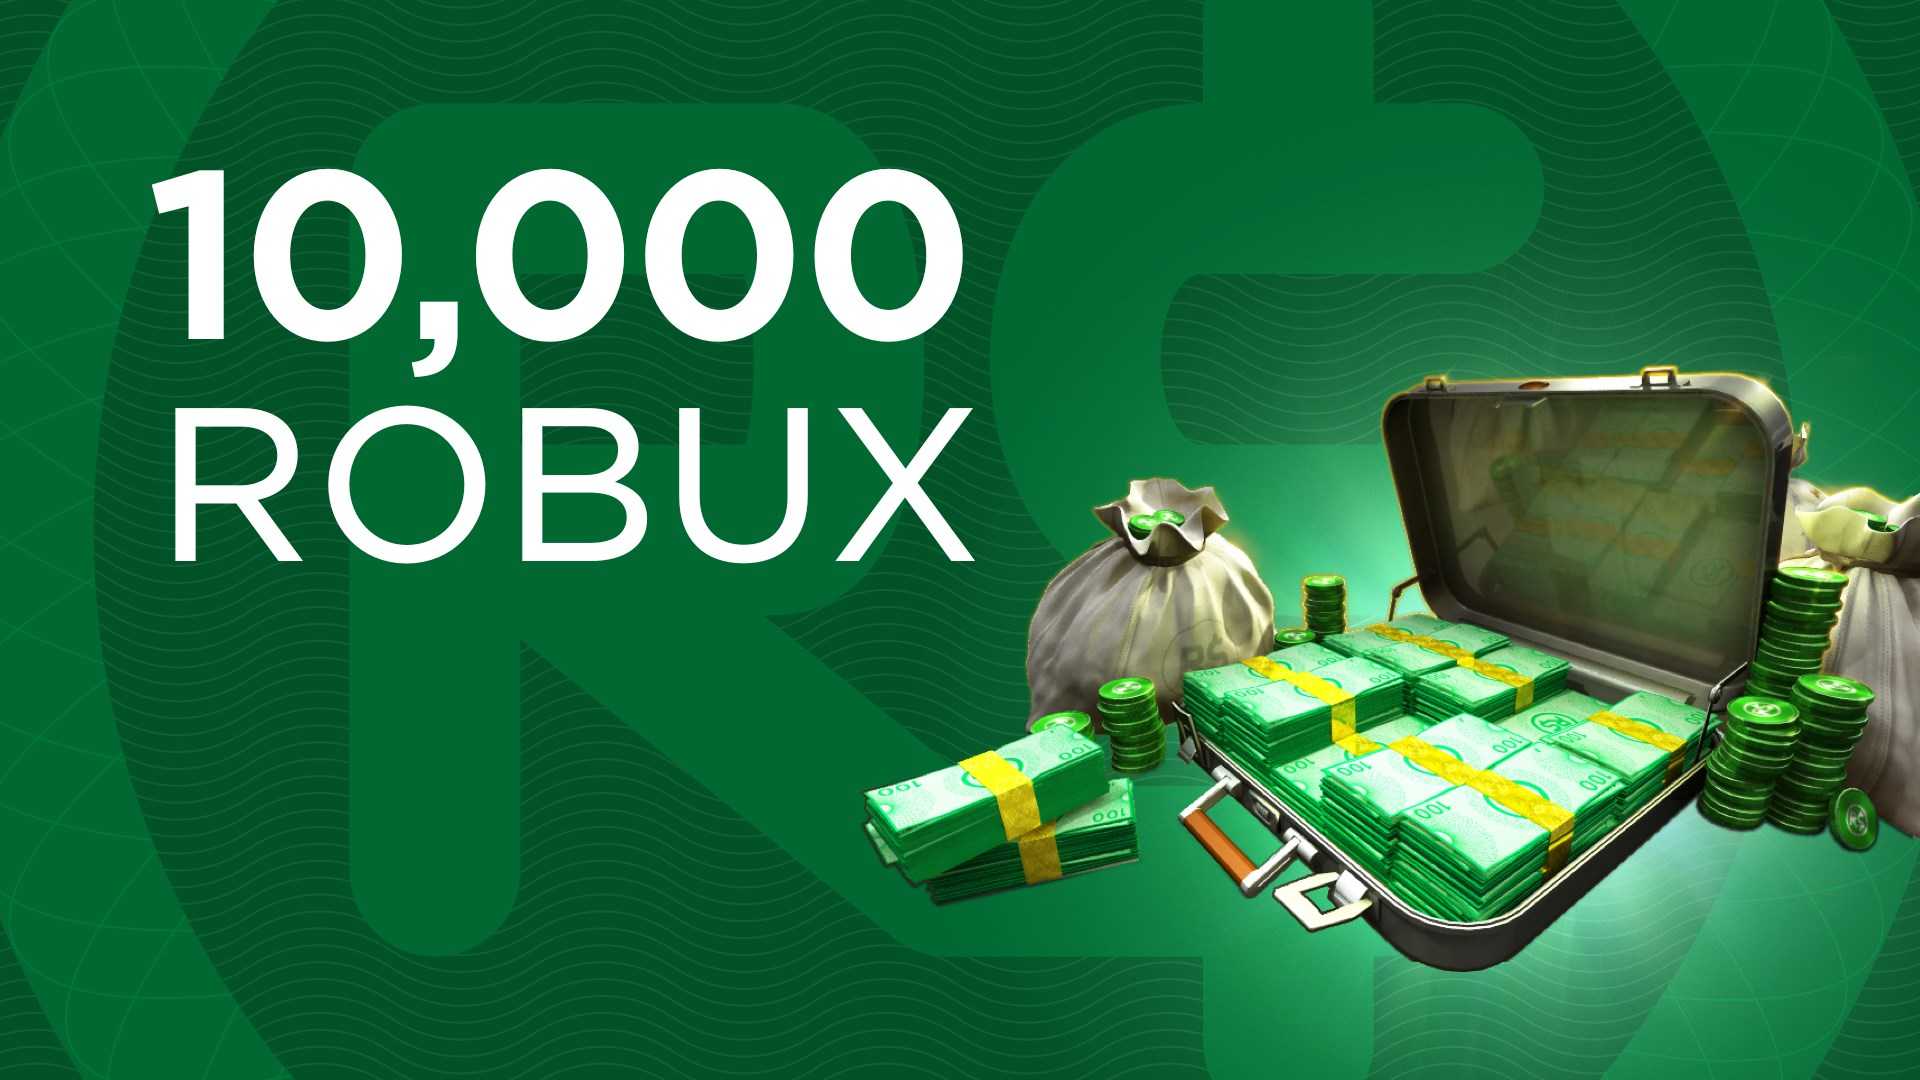 Roblox Robux 10 000rs Cheap Professional Game Services - roblox services robux